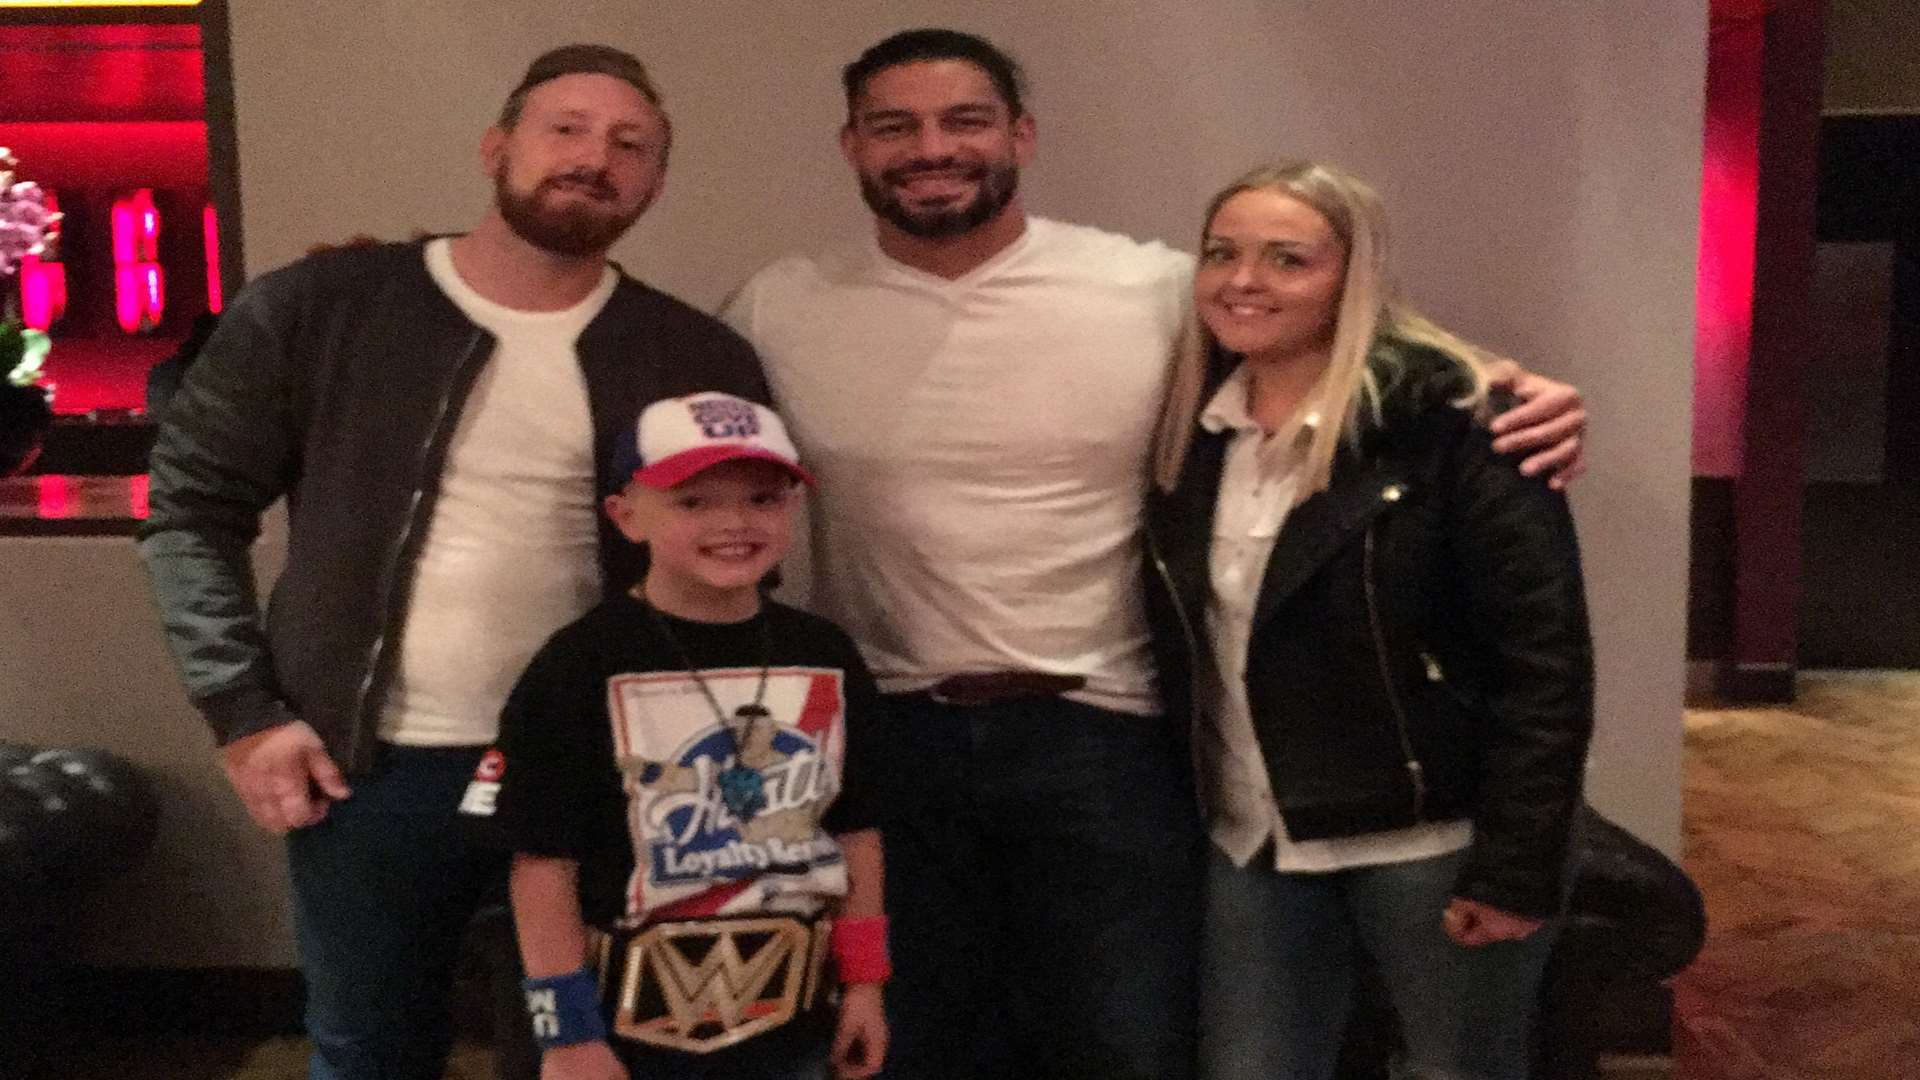 Tommie Farrow and his family got to meet Roman Reigns.